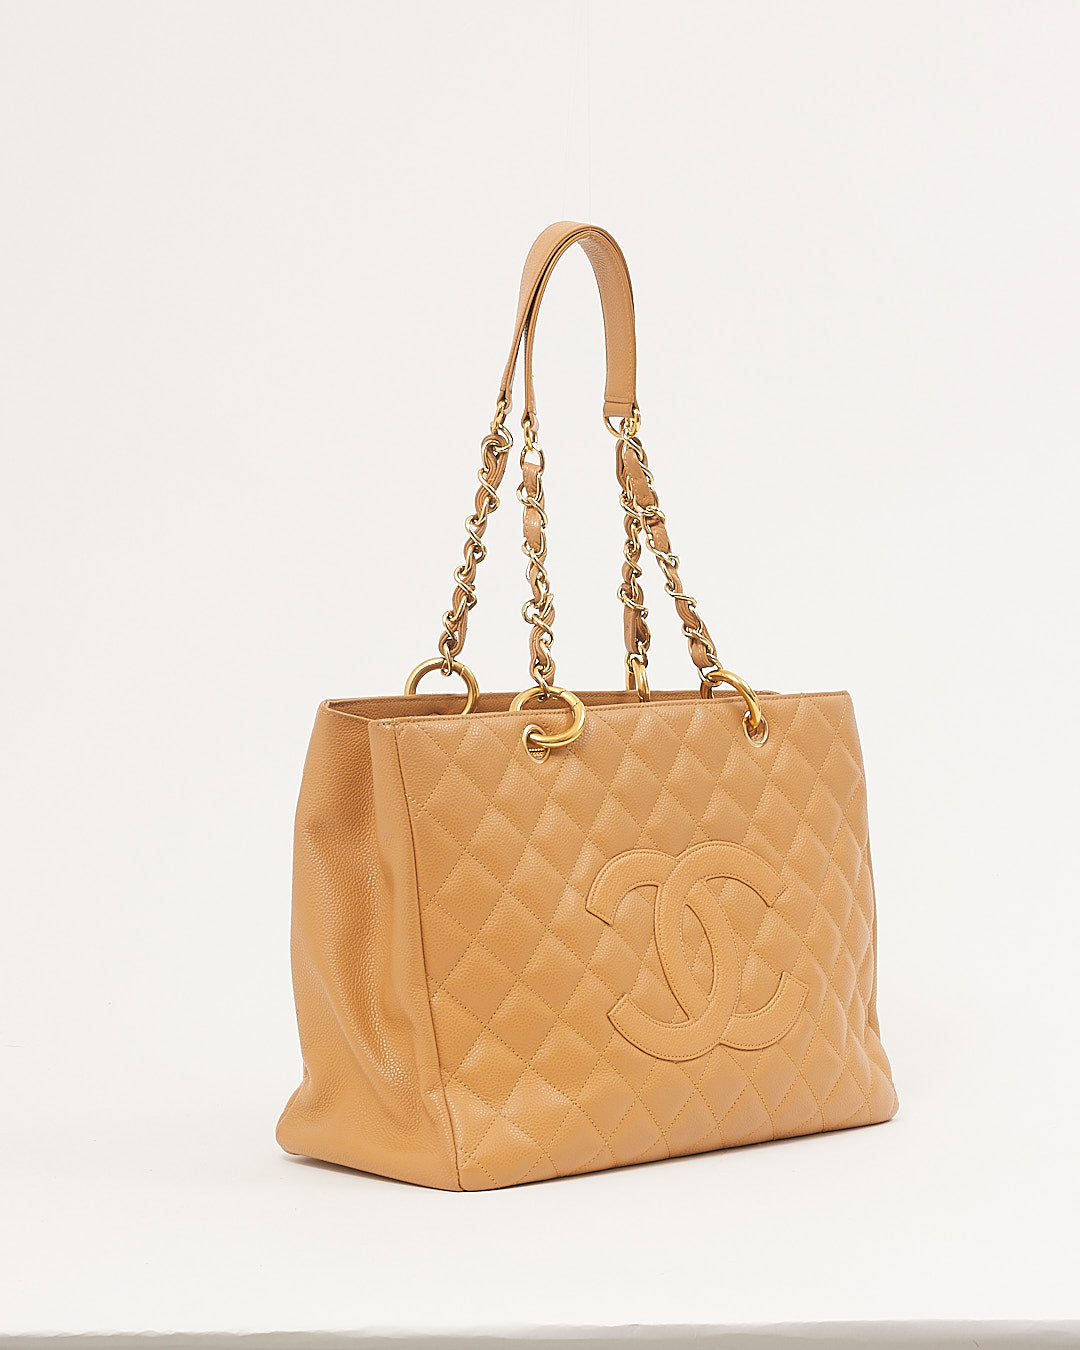 Chanel Tan Caviar Quilted Leather Grand Shopping Tote Bag